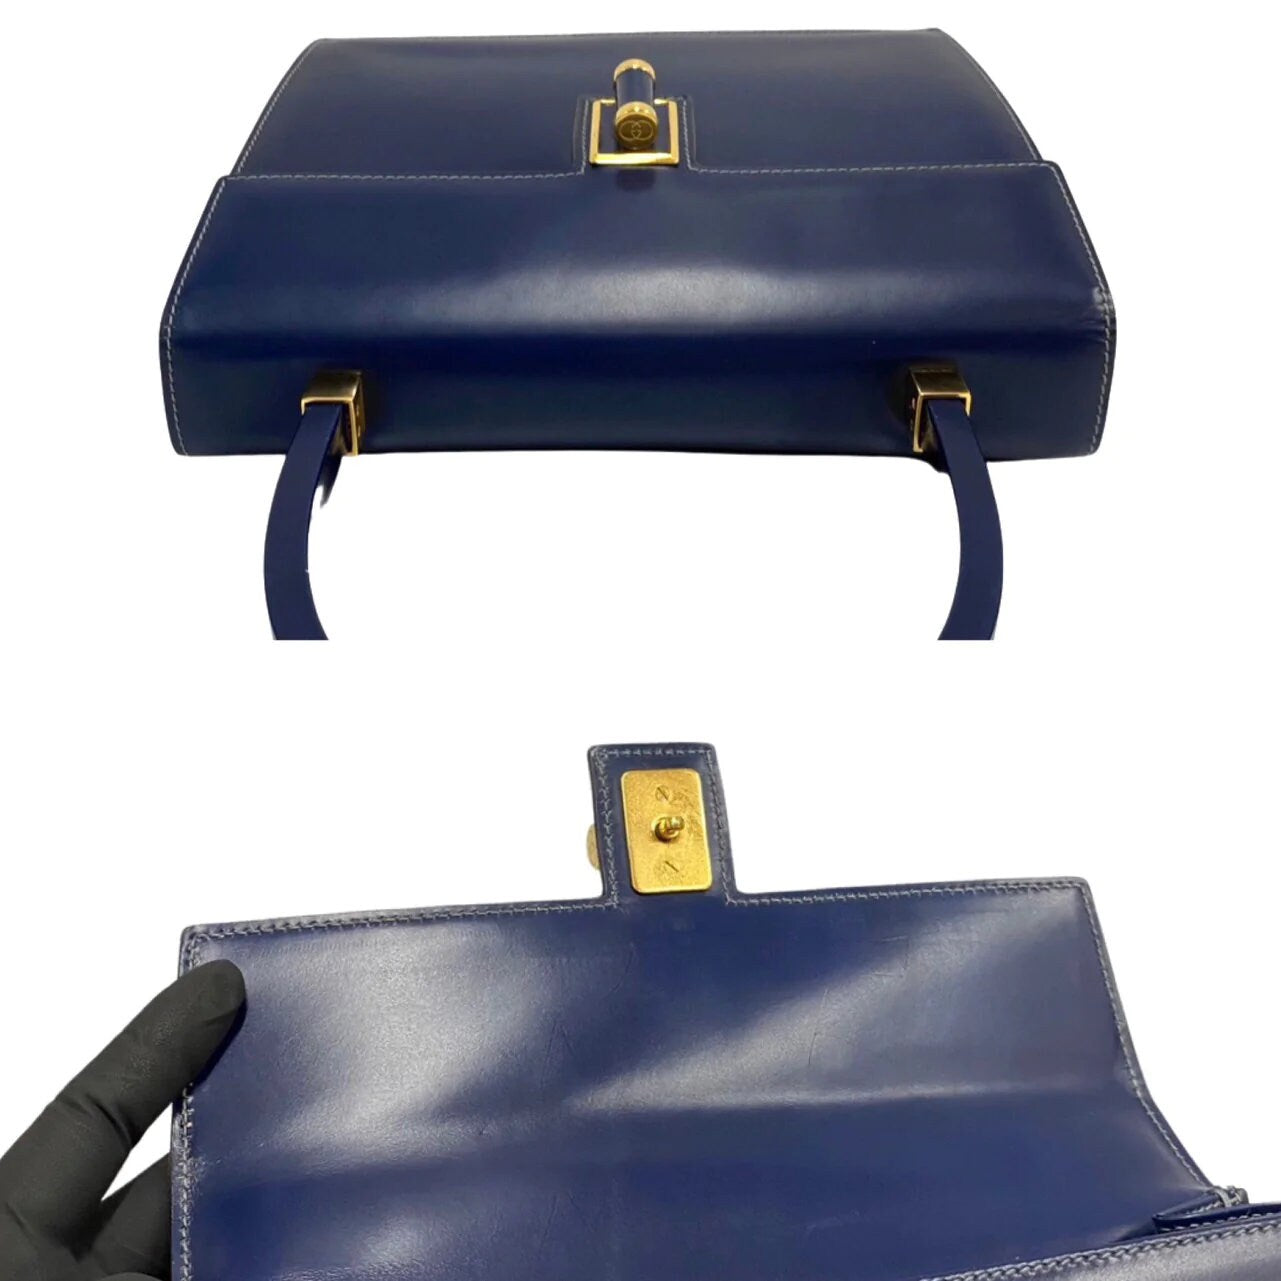 GUCCI VINTAGE 100% Authentic Genuine, Logo Embossed Top Handle Turn Lock Handbag, Dark Blue, Late 1980's - Early 1990's, Great Condition